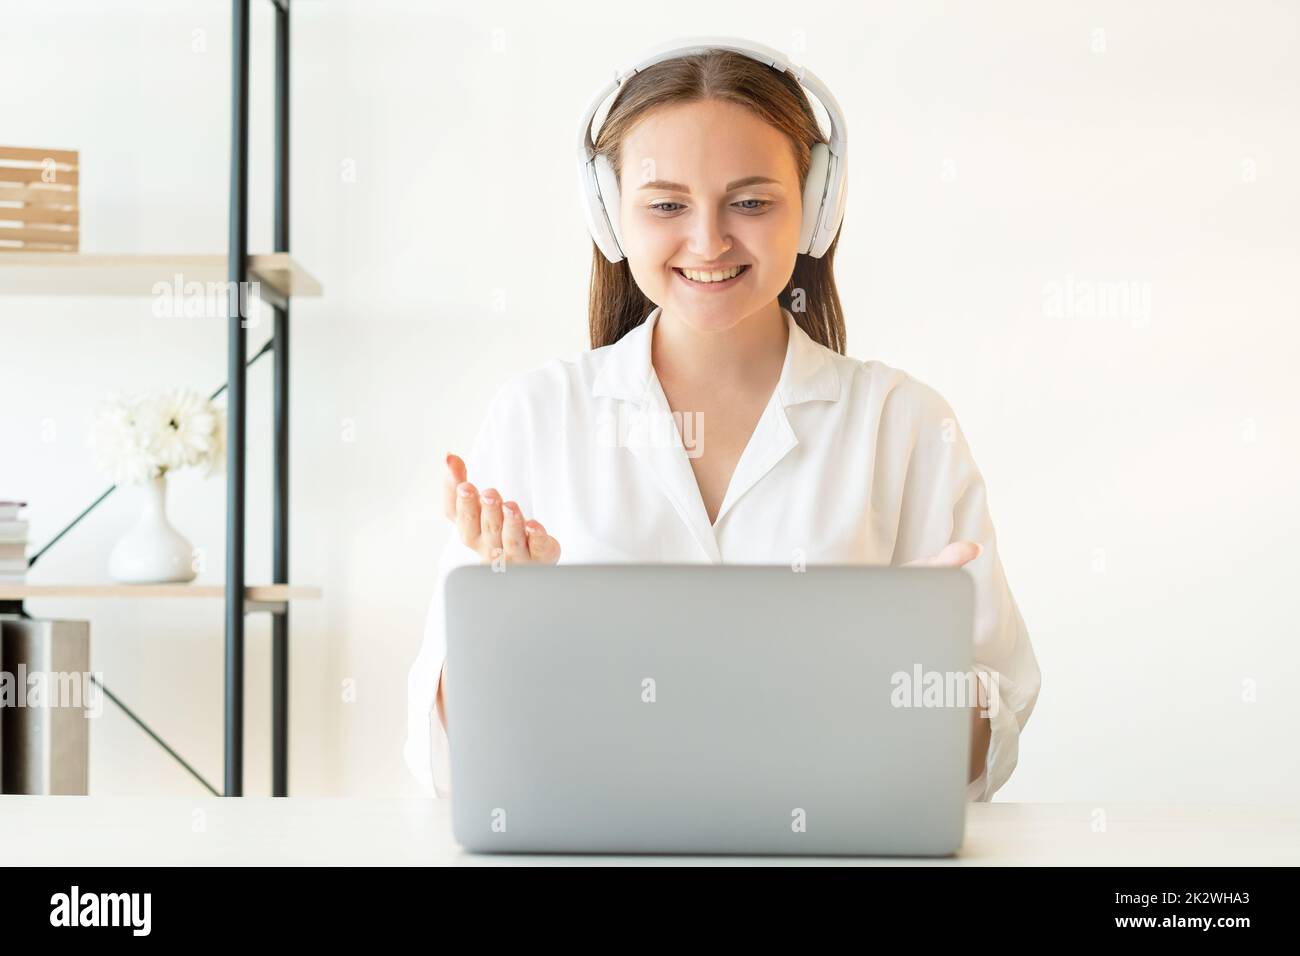 Zoom videochat. Virtual meeting. Corporate webinar. Online communication. Cheerful confident woman discussing project using white wireless headphones Stock Photo